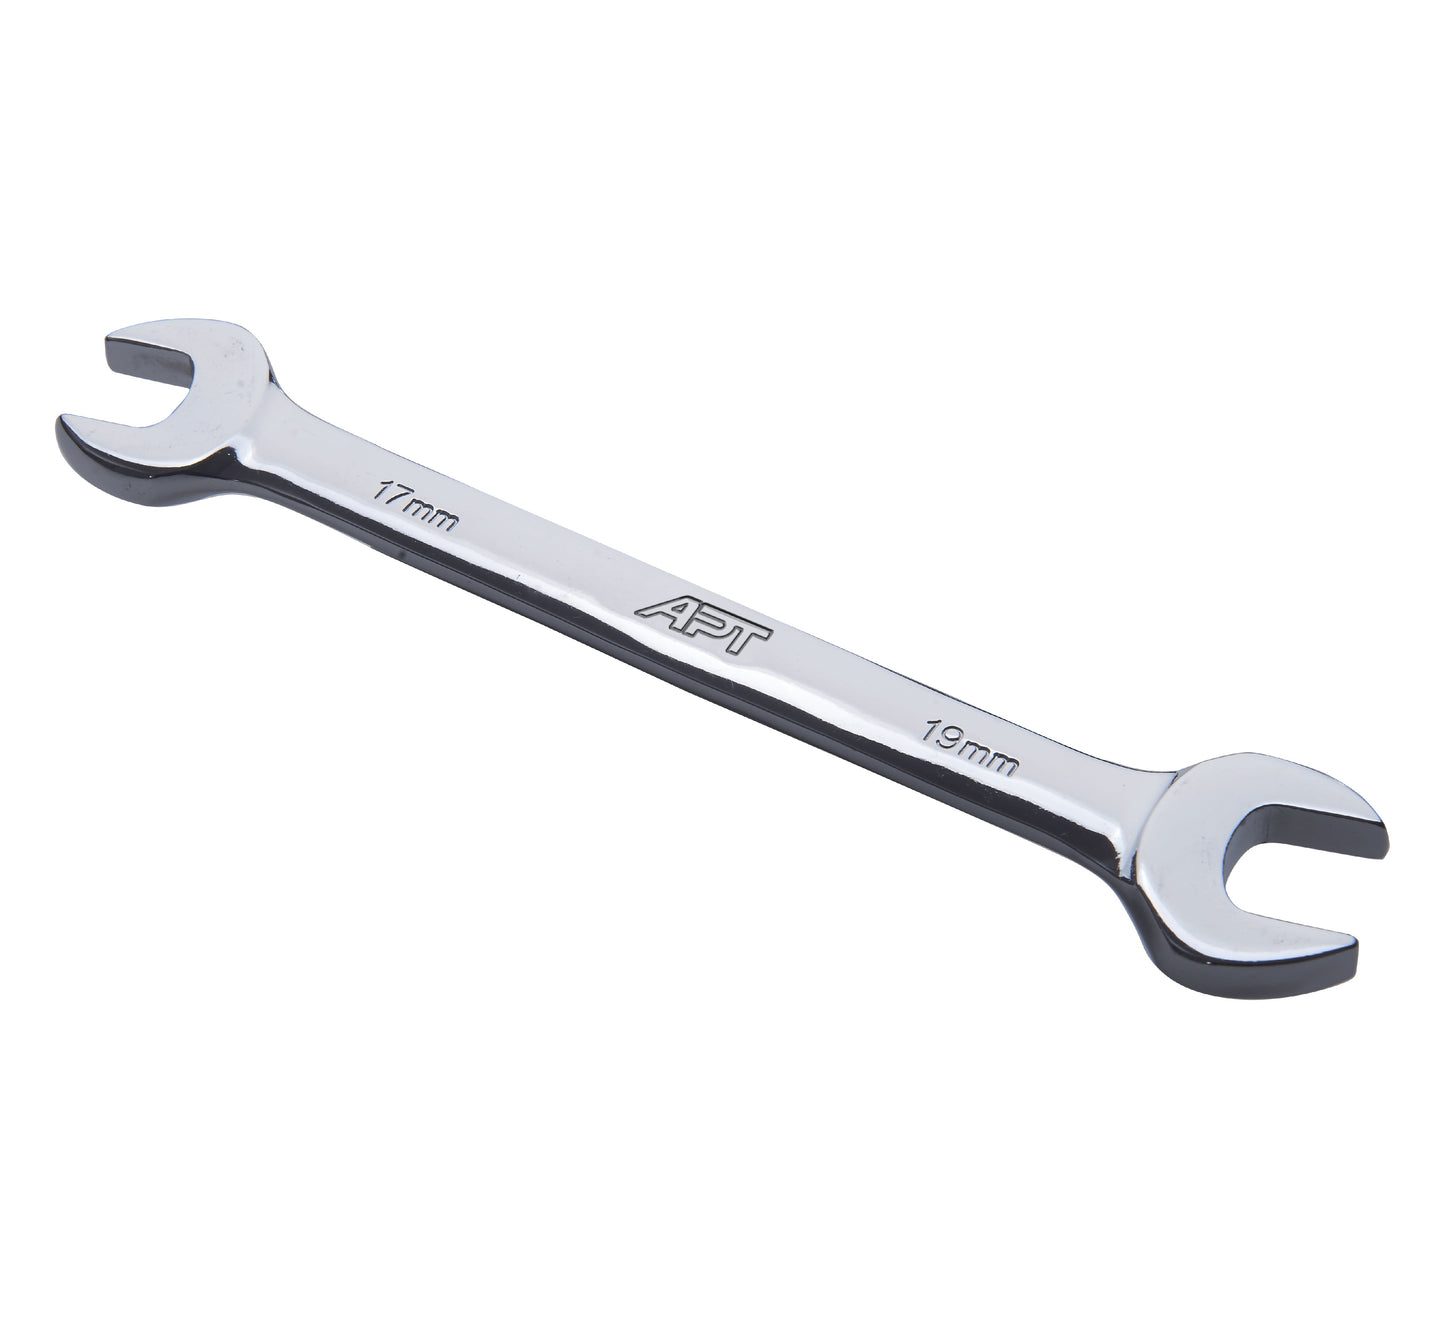 APT DOUBLE OPEN END WRENCH BRIGHT SATIN FINISH PP CARD HOLDER CR-V 24X27MM-DW251401-24X27